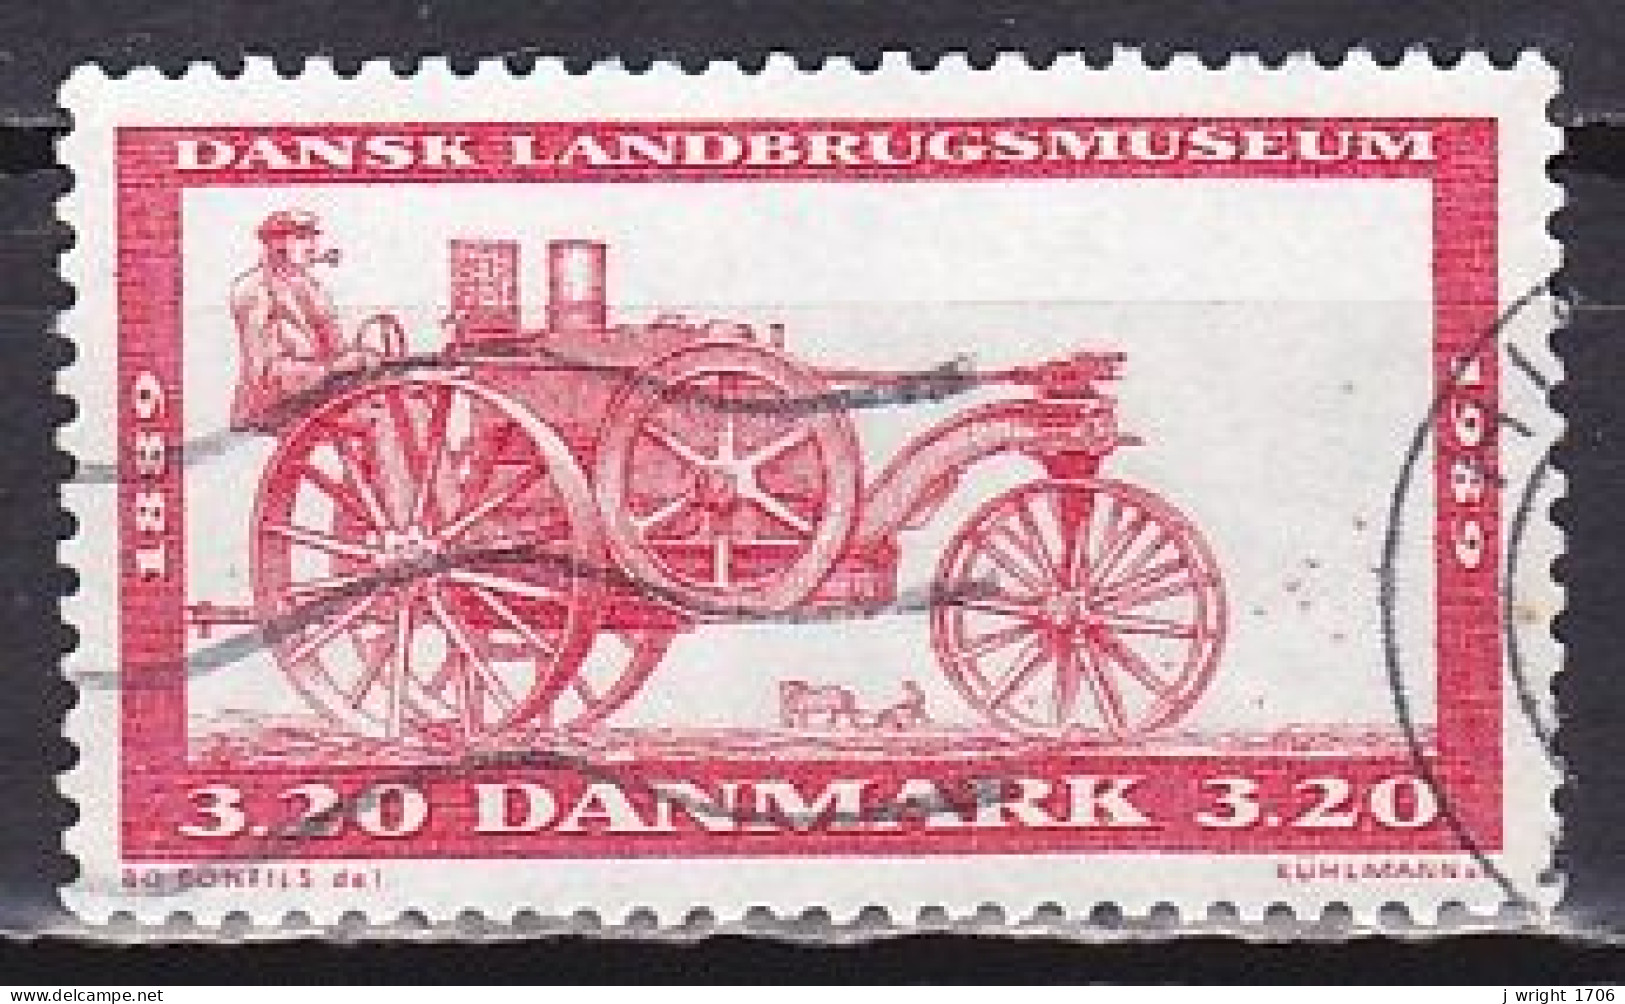 Denmark, 1989, Danish Agricultural Museum Centenary, 3.20kr, USED - Used Stamps